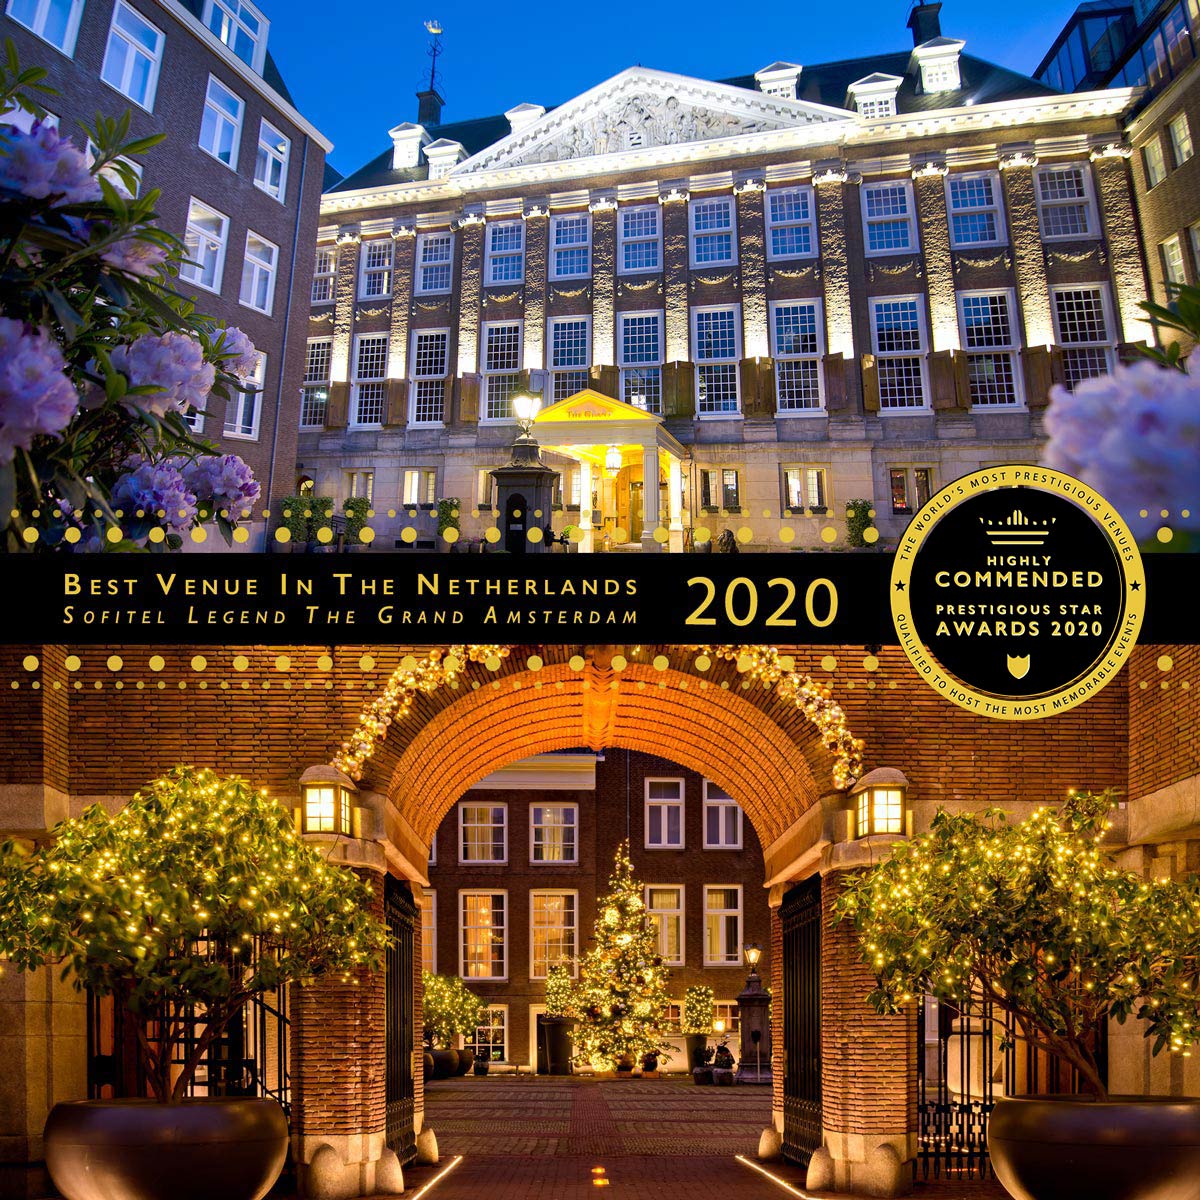 The Courtyard at Sofitel Legend The Grand Amsterdam